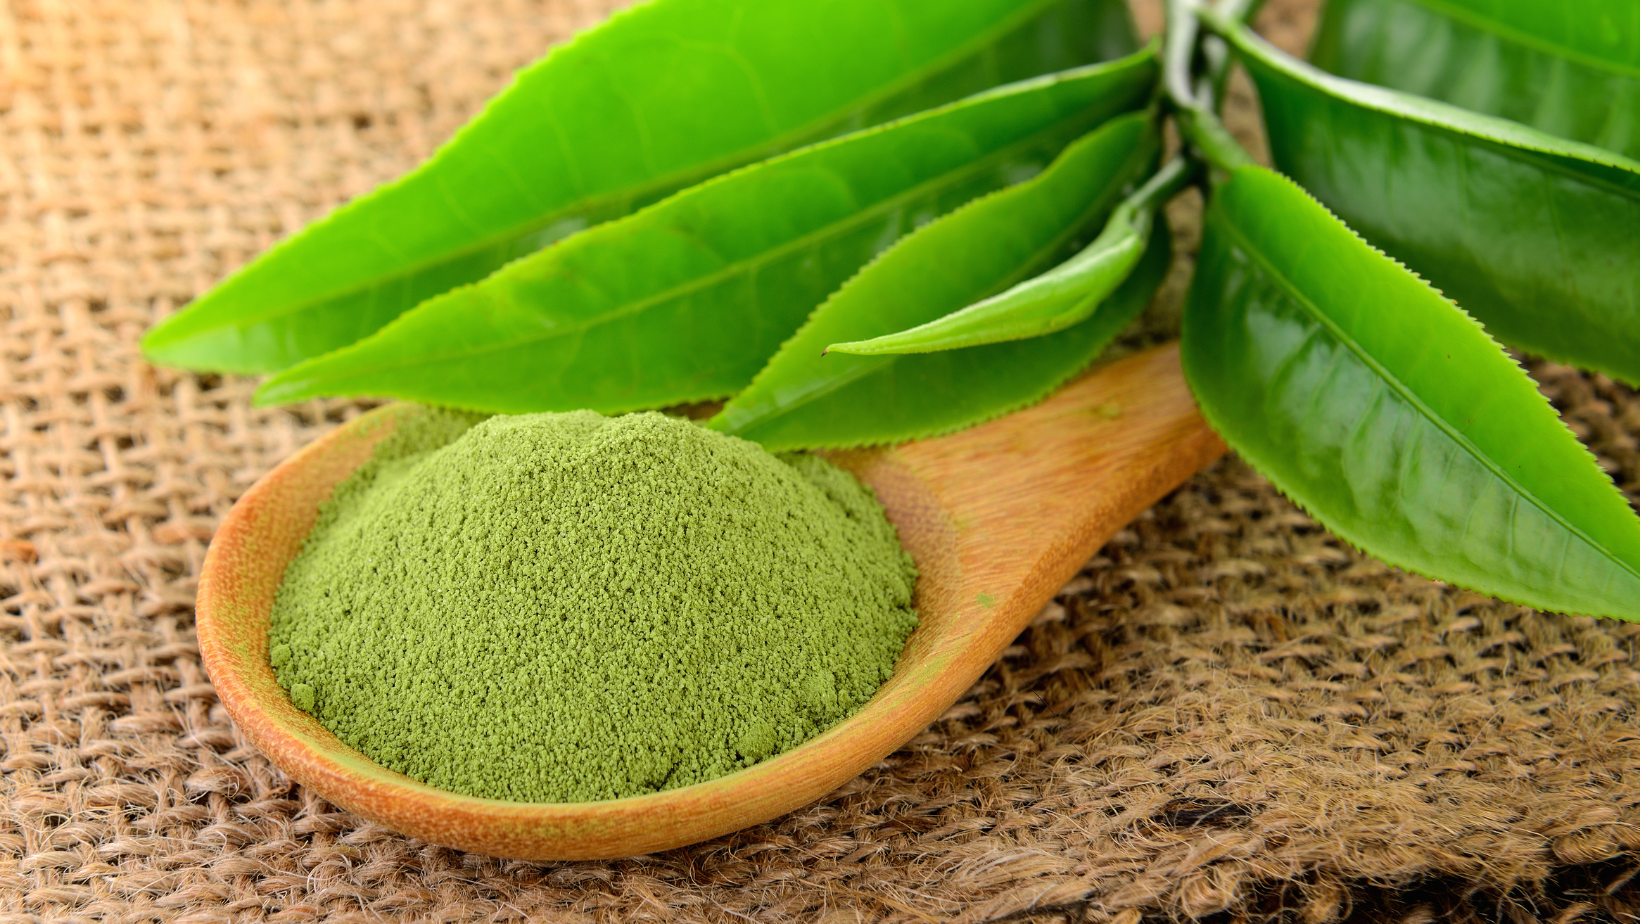 Best Green Tea Extract For Weight Loss, Boost Energy Levels, and Anti-aging